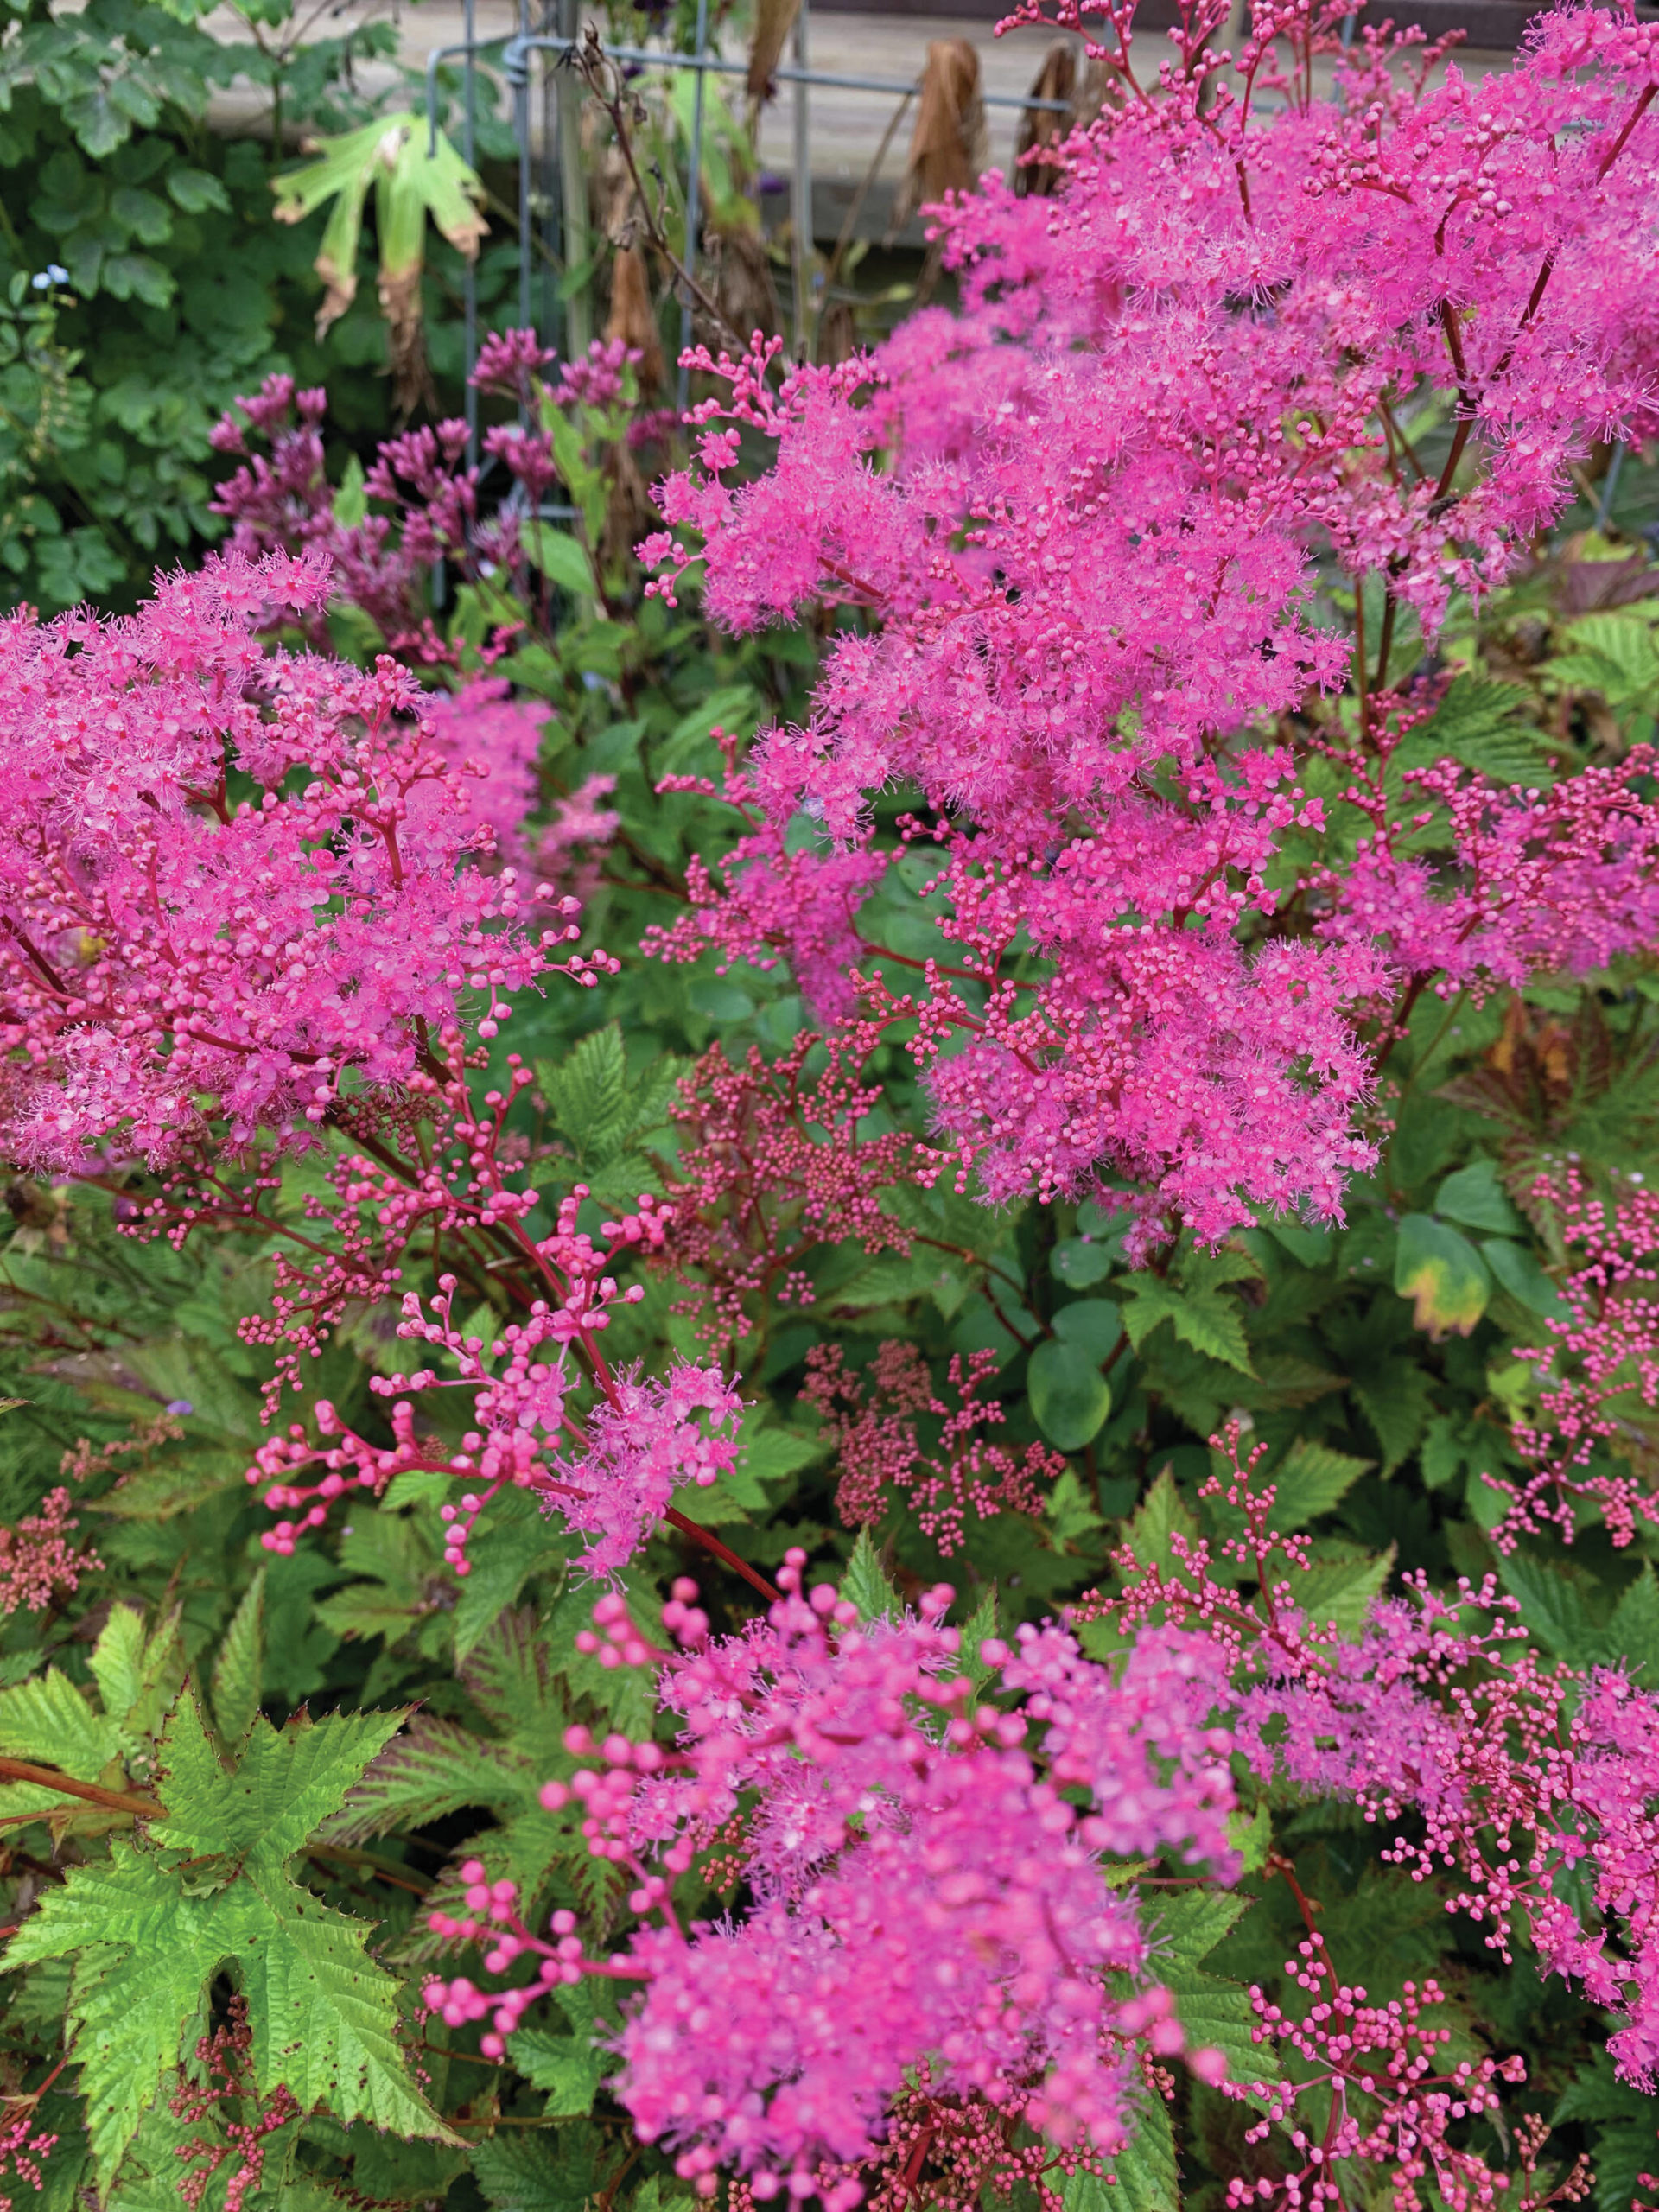 Filipendula kehome is just starting to offer fall color in the garden. (Photo by Rosemary Fitzpatrick)